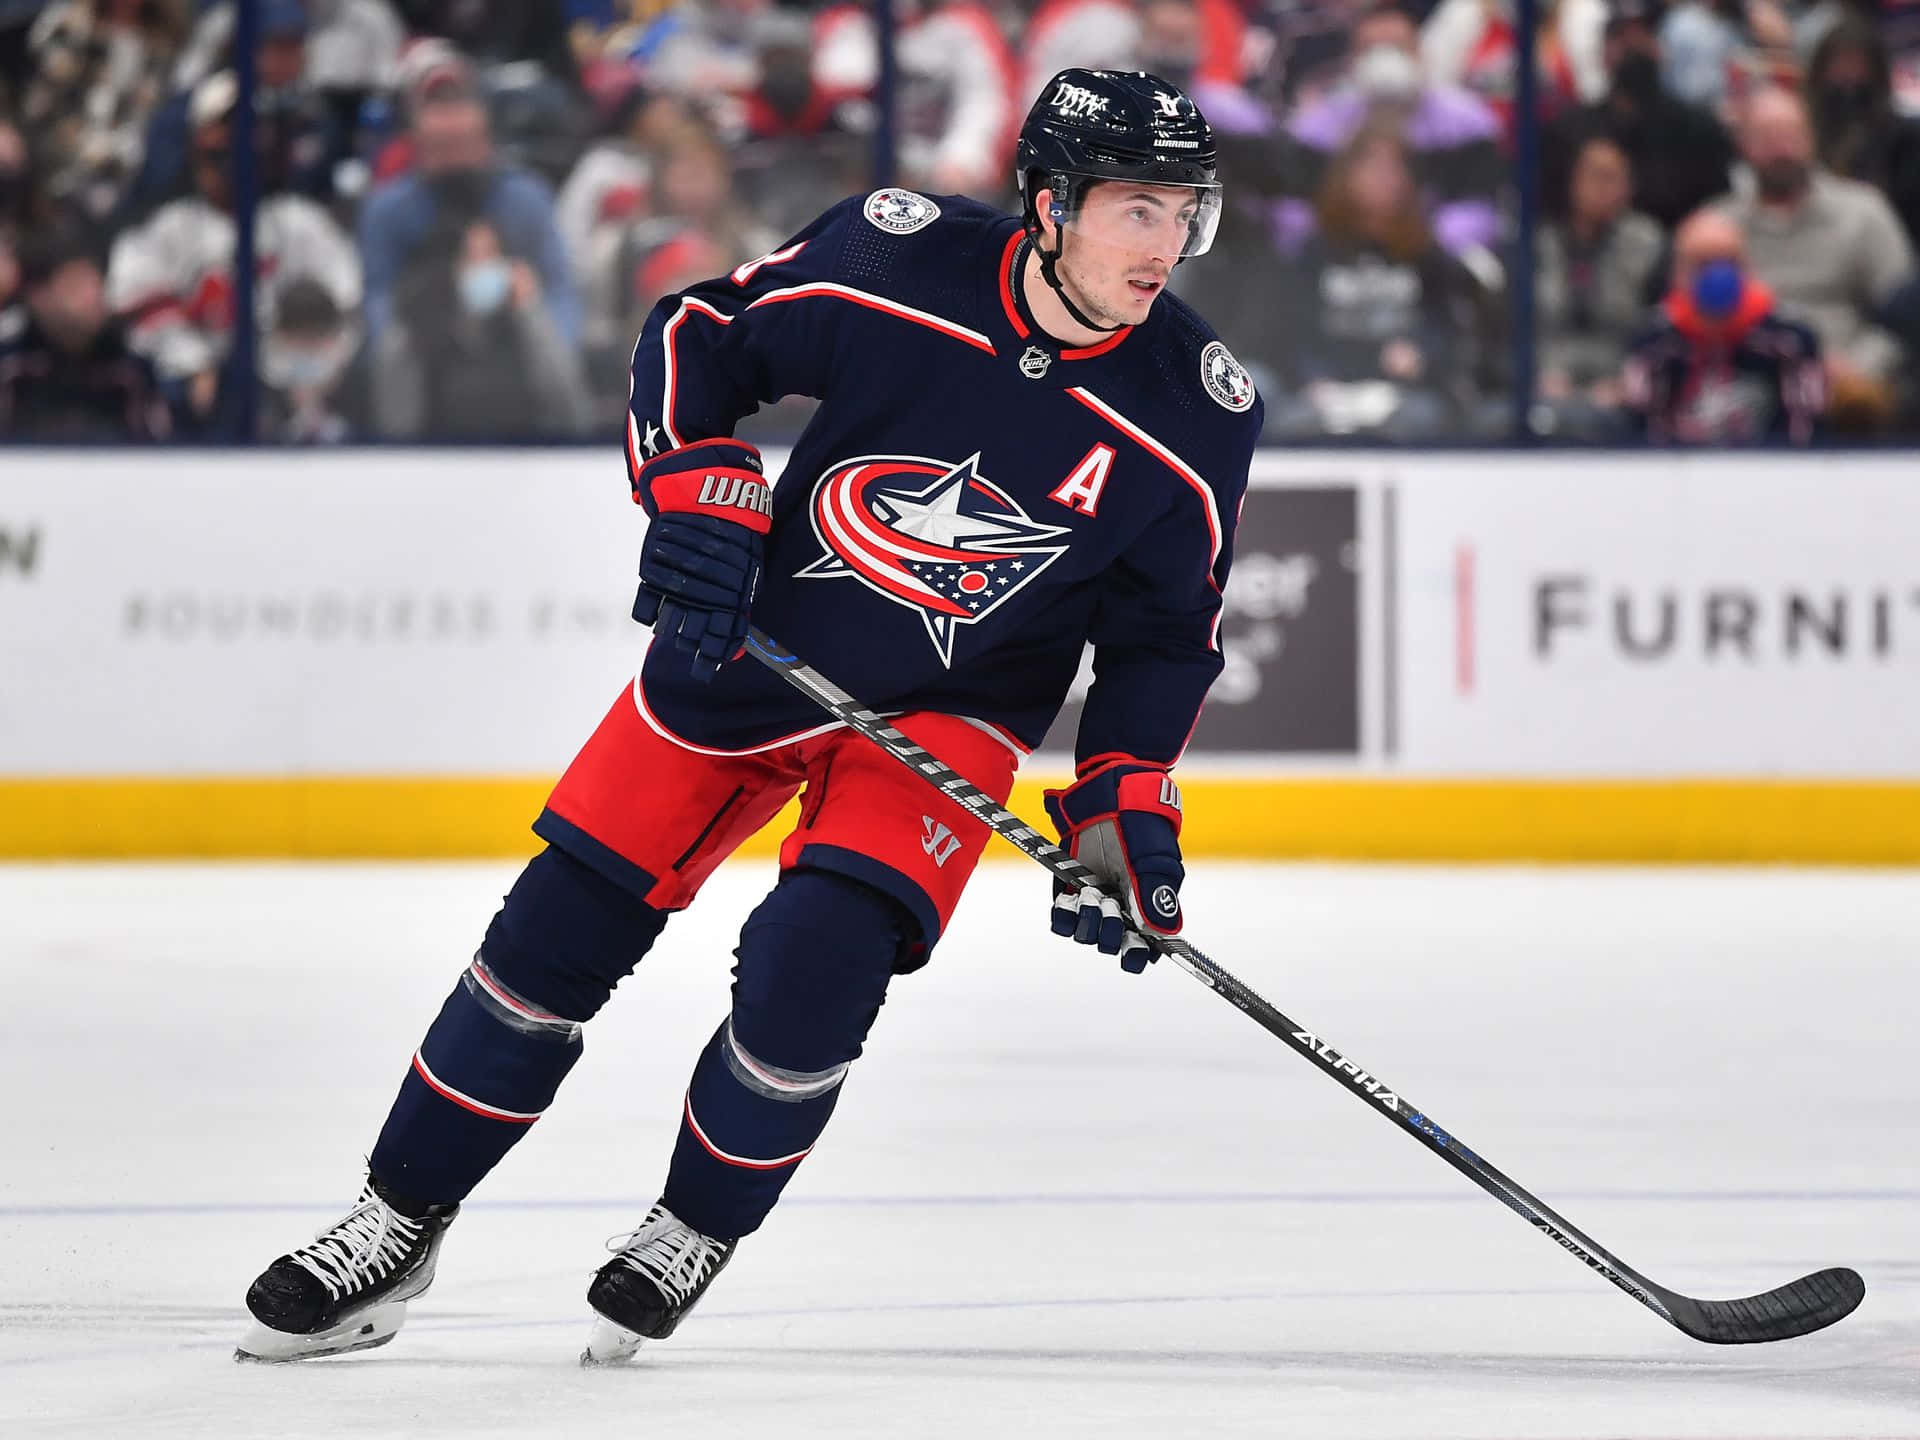 Zacharywerenski Is A Native Of Grosse Pointe, Michigan And A Professional Ice Hockey Player In The National Hockey League (nhl). He Currently Plays Defense For The Columbus Blue Jackets And Has Been A Key Player For The Team Since His Rookie Season In 2016. His Impressive Skills On The Ice And Dedication To The Sport Have Made Him A Fan Favorite And A Rising Star In The Nhl. If You're A Fan Of Zachary Werenski, Then You Might Want To Consider Adding Him To Your Computer Or Mobile Wallpaper. You Can Find Plenty Of High-quality Images Of Zachary In Action Online, And Many Of Them Are Perfect For Wallpaper Use. Whether You're Looking For A Dynamic Action Shot Or A More Relaxed Pose, There's Sure To Be A Zachary Werenski Wallpaper That Suits Your Style. So Why Not Show Your Support For This Talented Athlete And Let Him Inspire You Every Time You Look At Your Computer Or Mobile Screen? Wallpaper